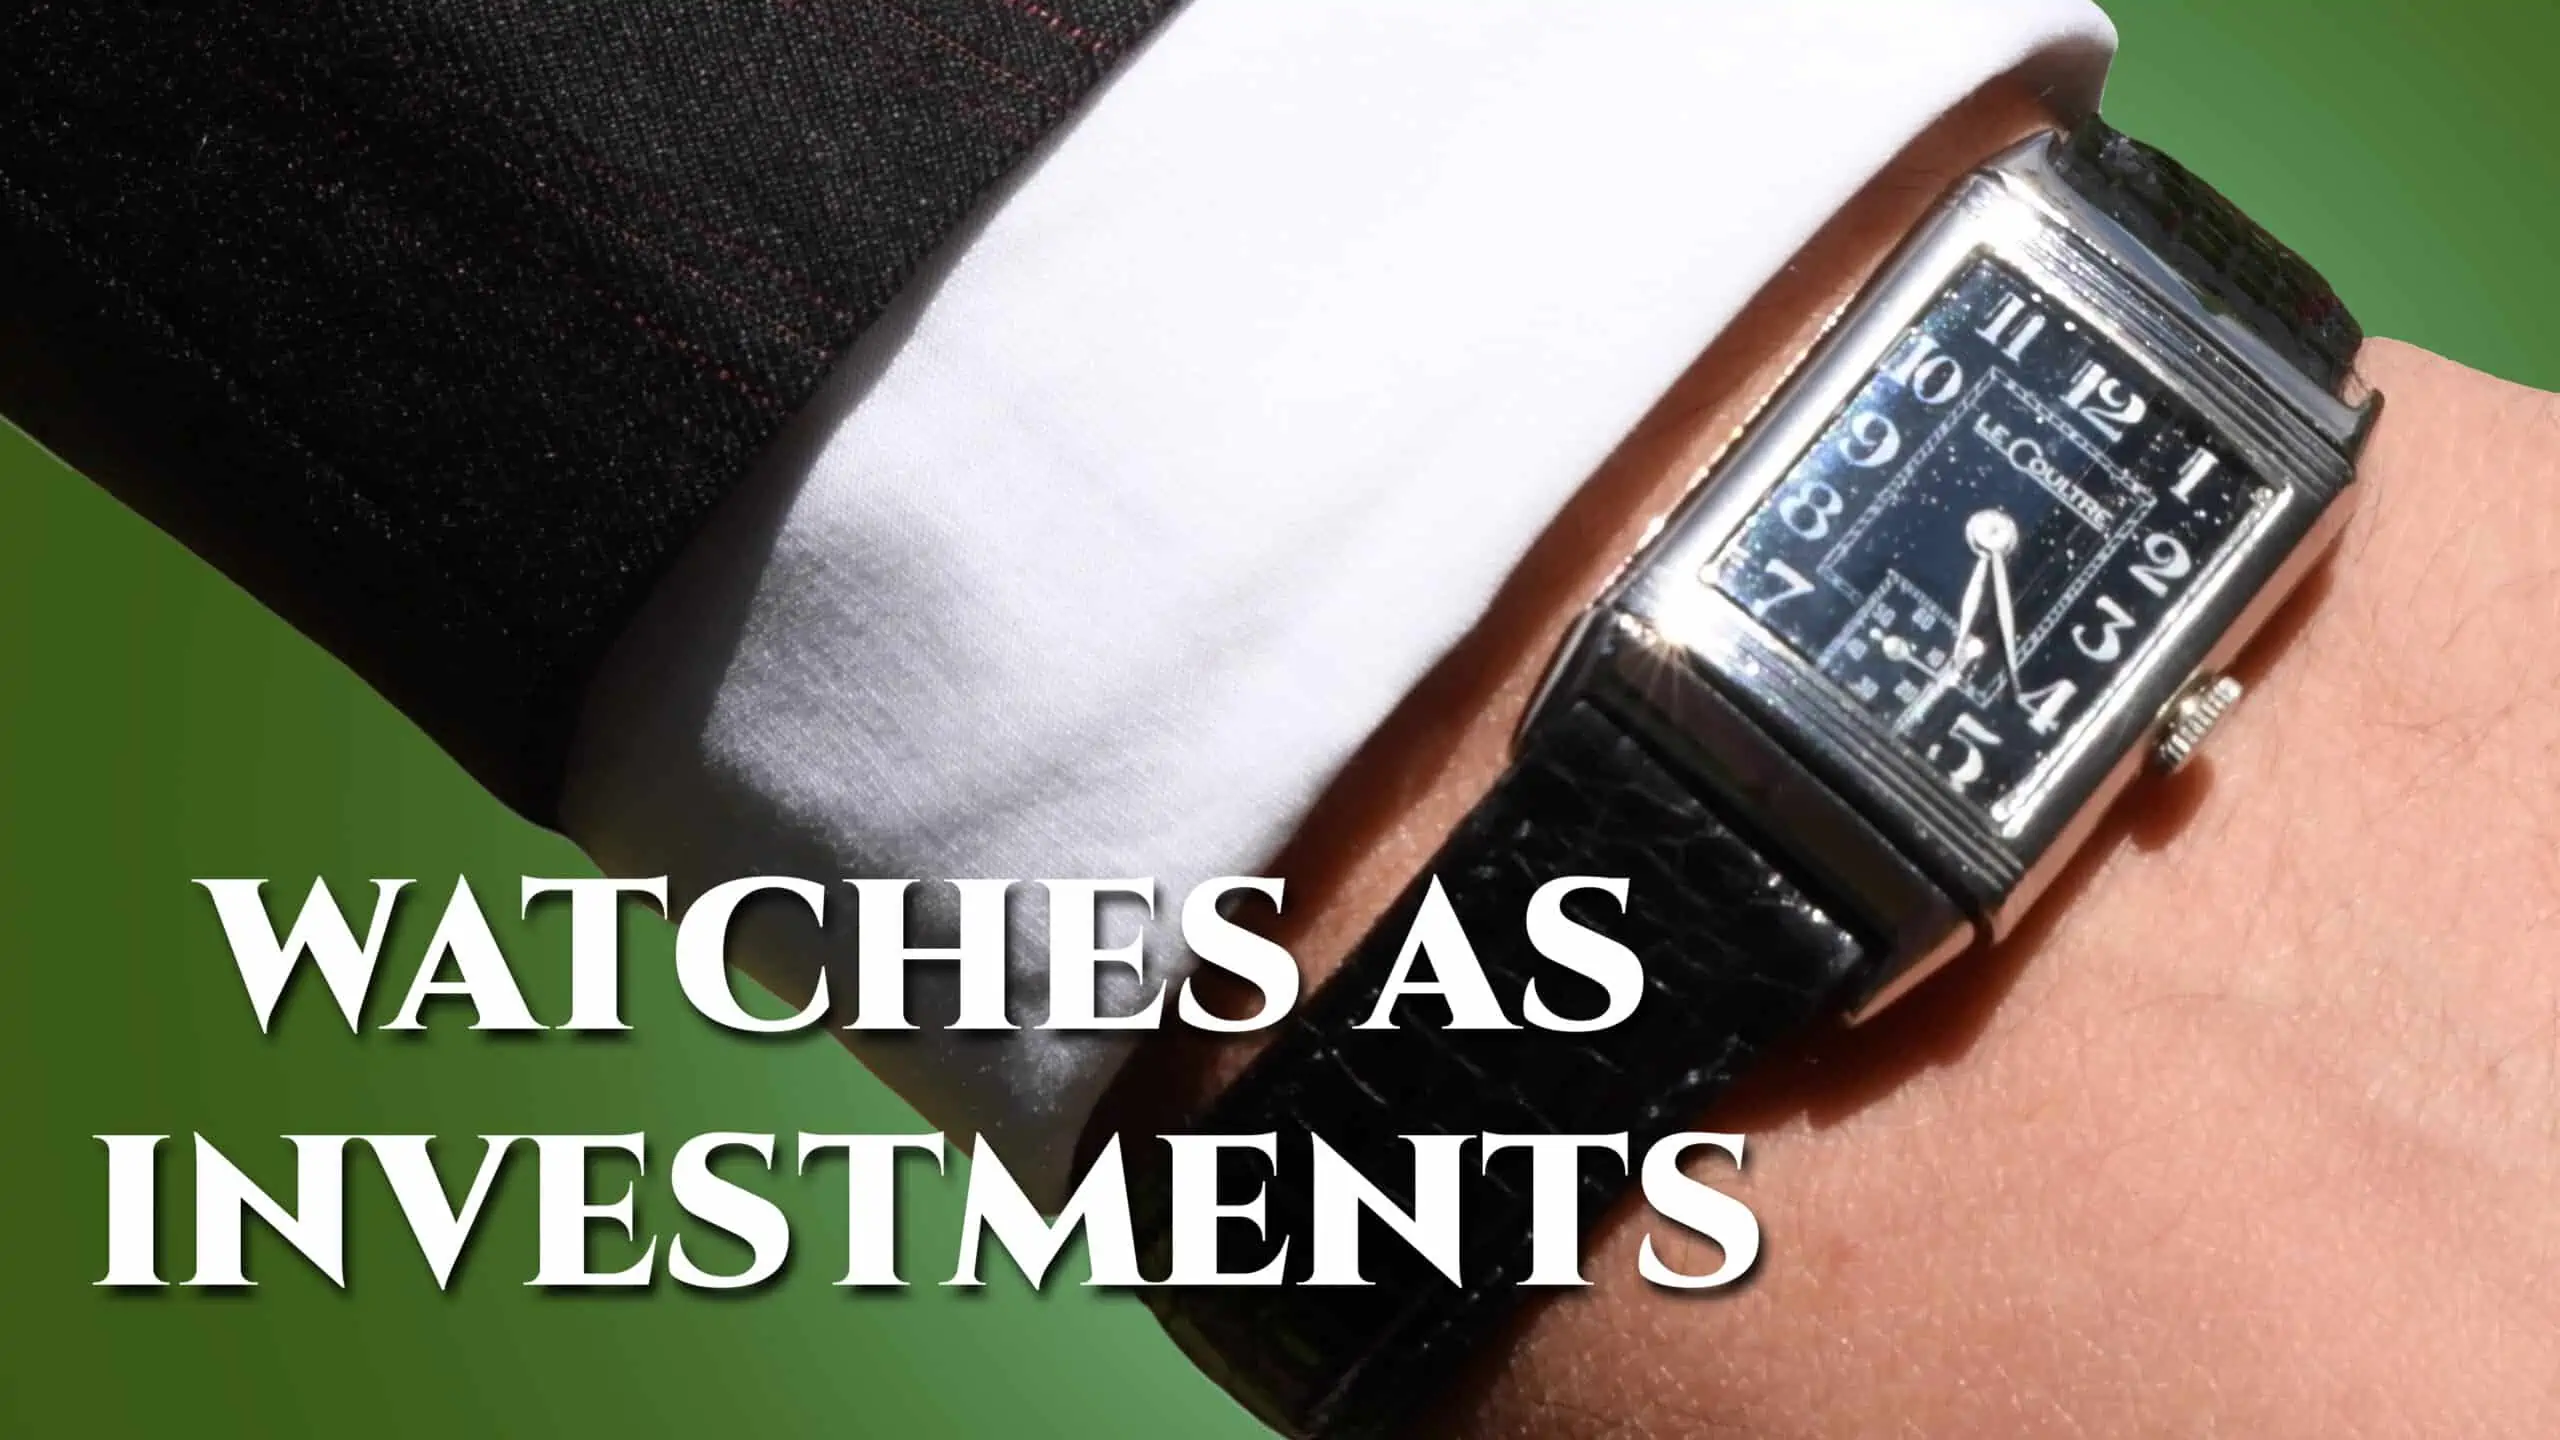 watches as investments 3840x2160 scaled